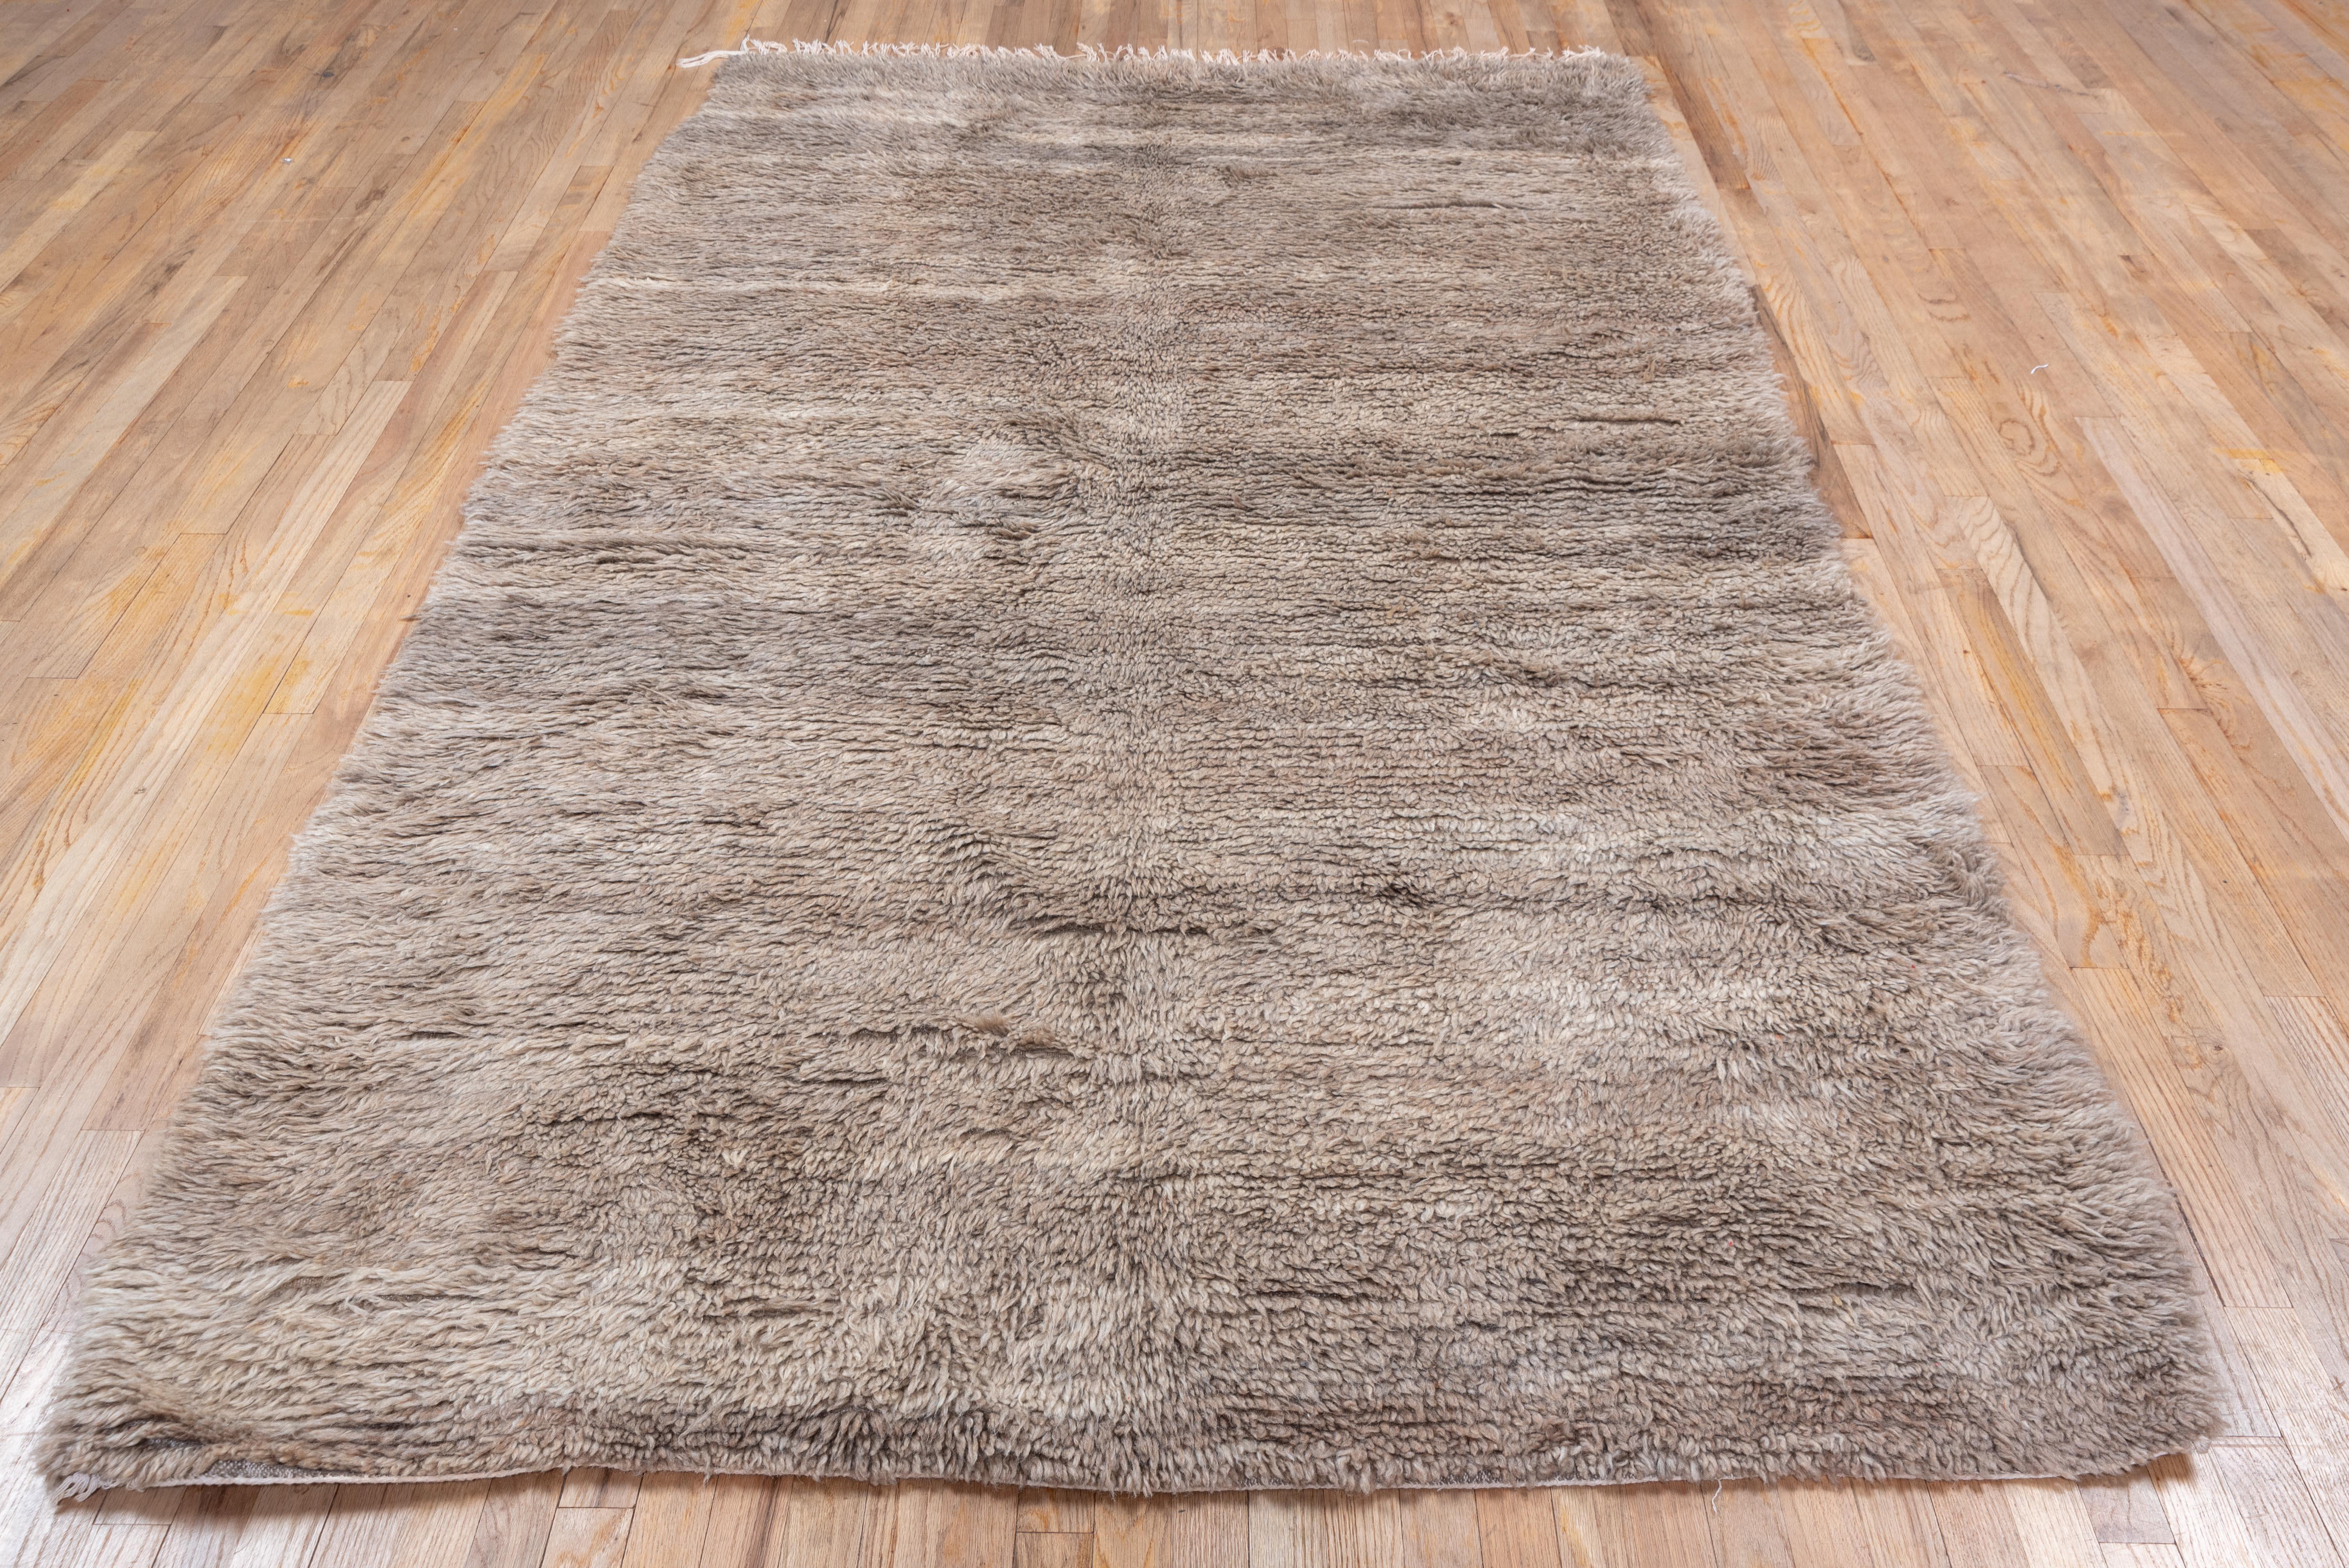 Creamy Brown Wool Moroccan Rug in Allover Solid Field For Sale 1